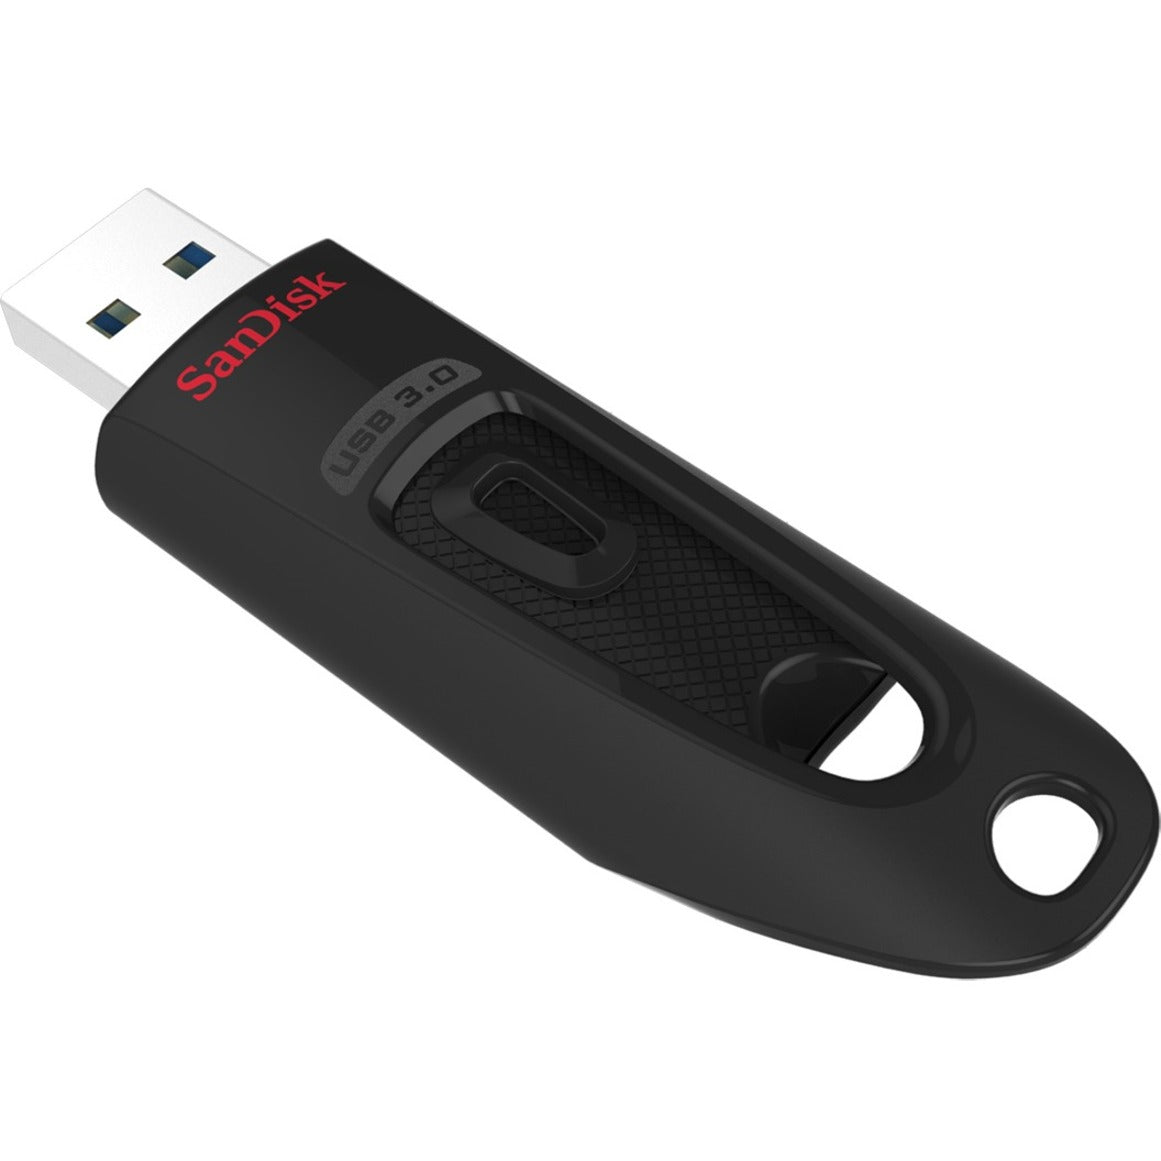 SanDisk SDCZ48-512G-A46 Ultra USB 3.0 Flash Drive - 512GB, High-Speed Data Transfer and Storage